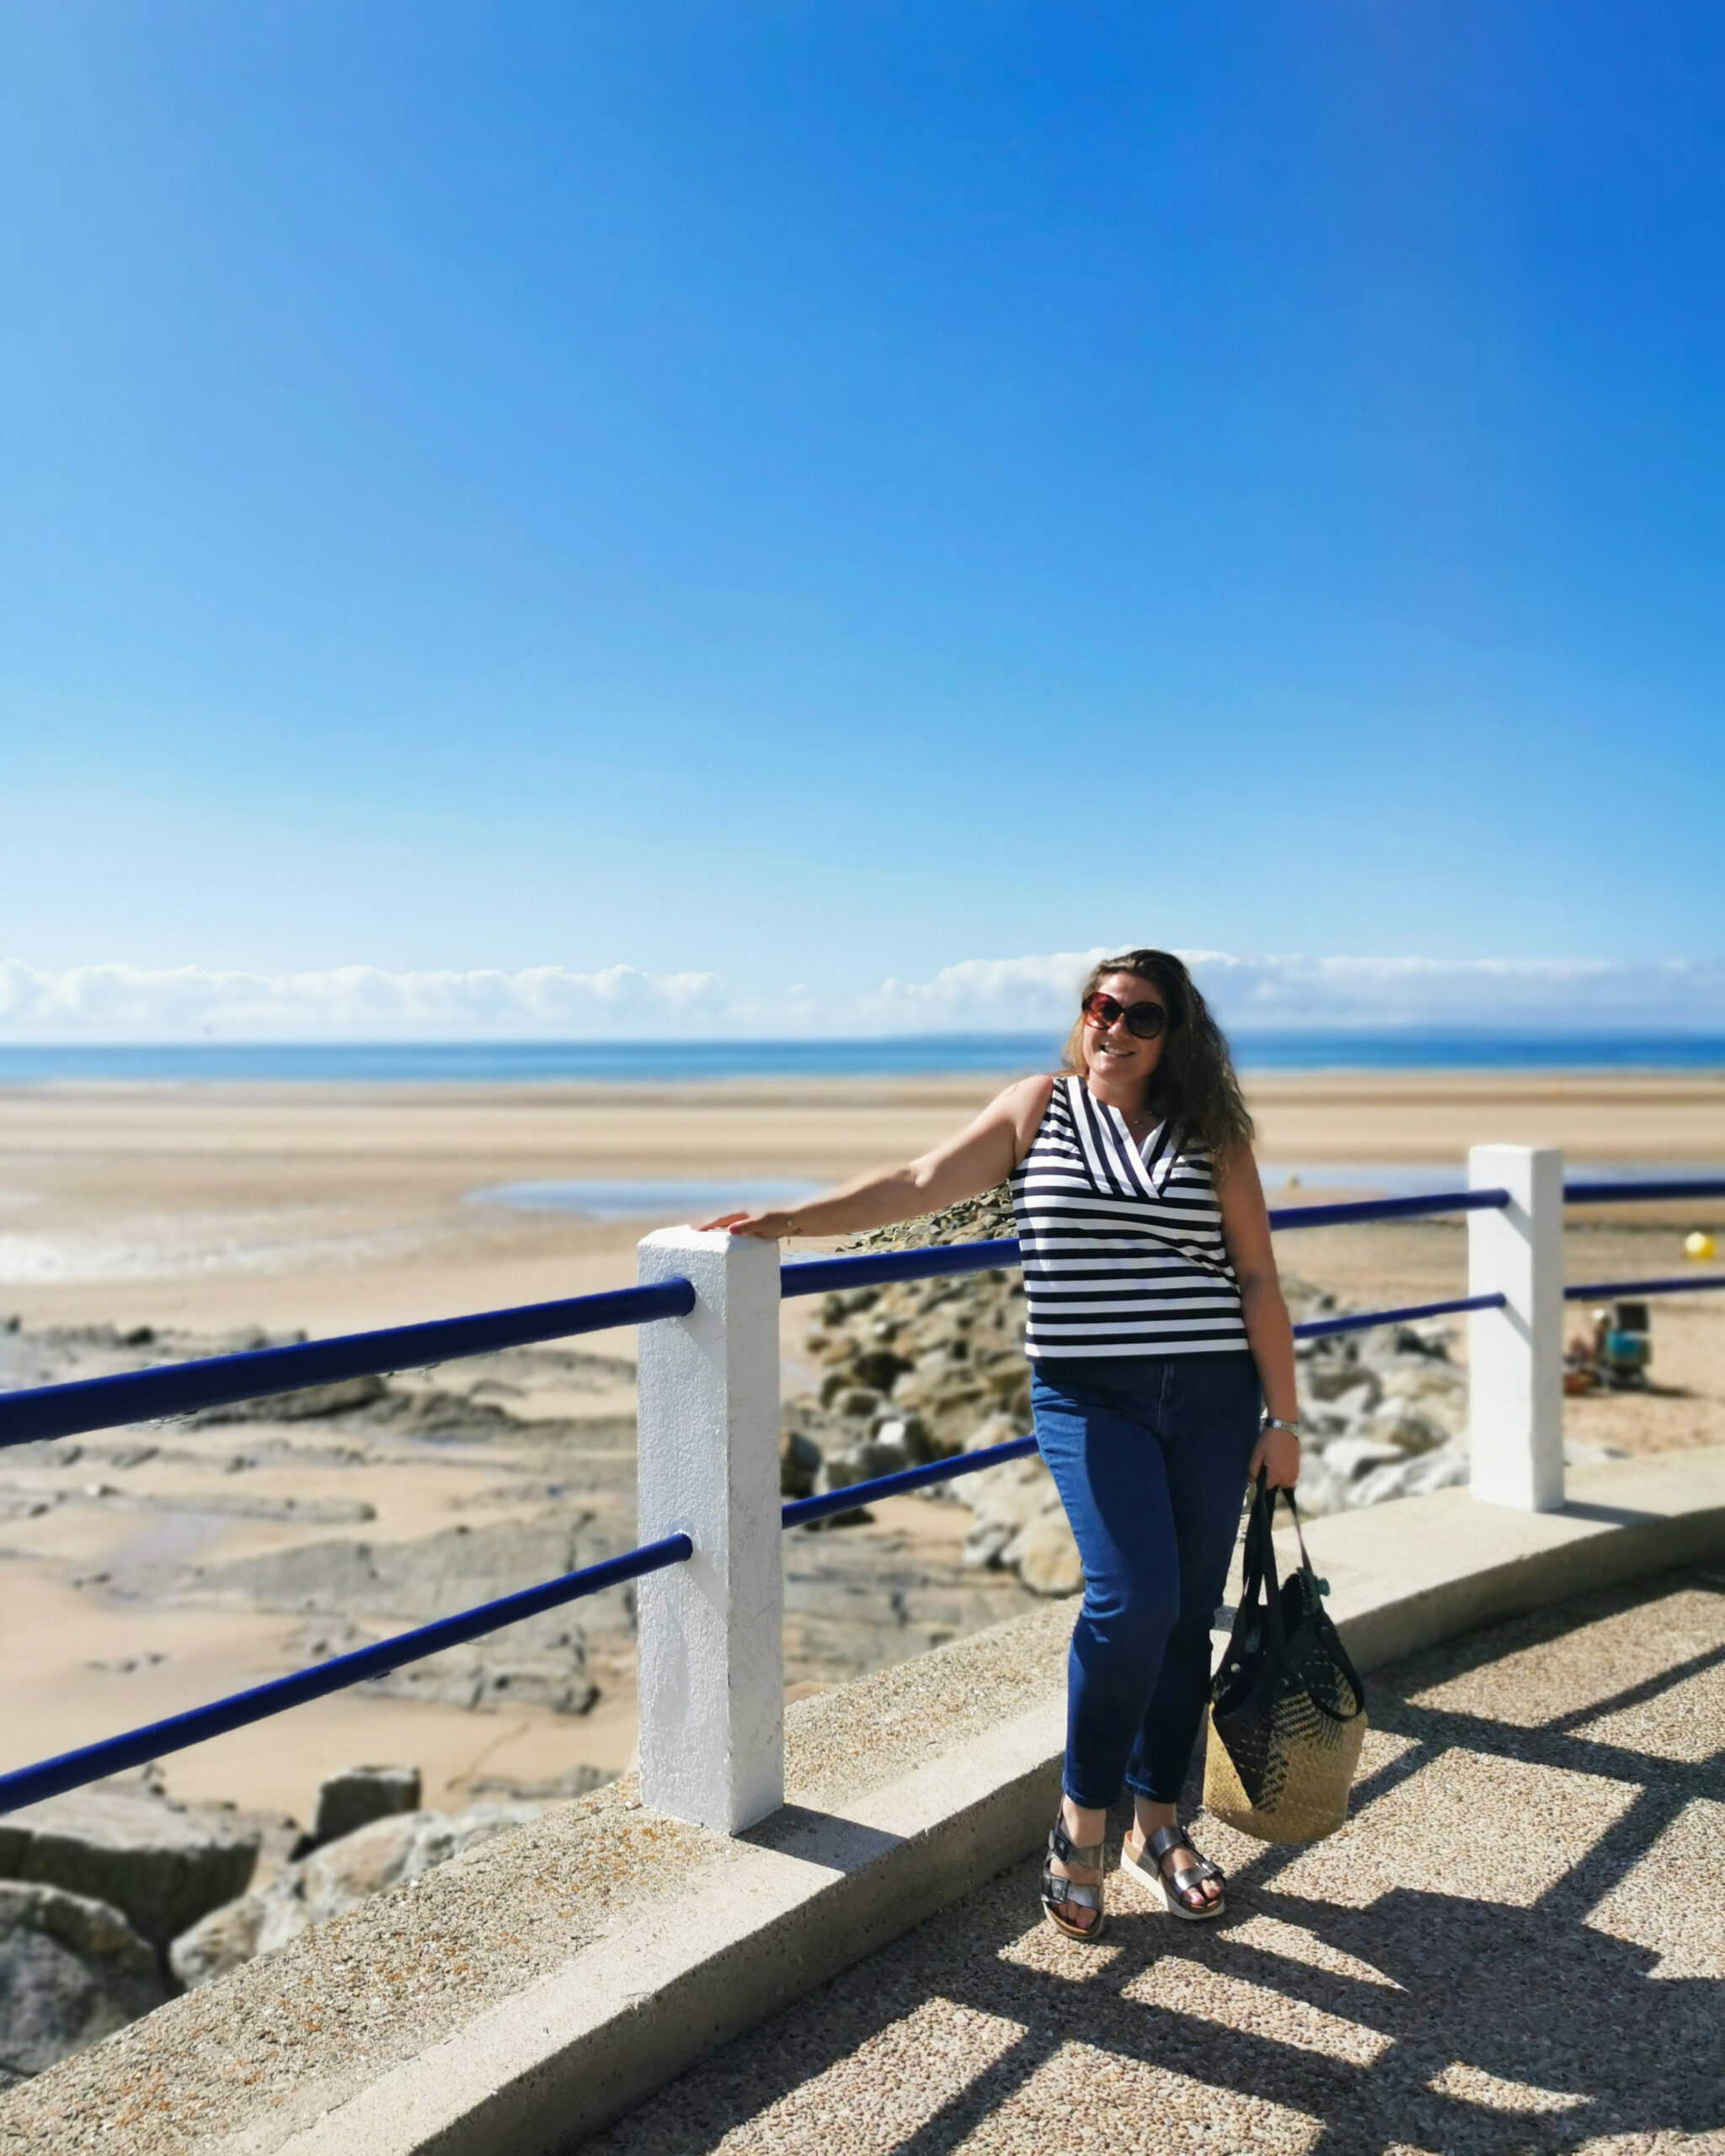 Things To Do In Normandy With Kids, Visit France, Visit Normandy, Normandy Tourism, Brittany Ferries, Family-Friendly, Family Holidays, Activities to Do, The Frenchie Mummy, Travel Blog, Family Travel, Cherbourg, French Beaches, WWII, Omaha Beach, La Cité De La Mer, Barneville-Carteret